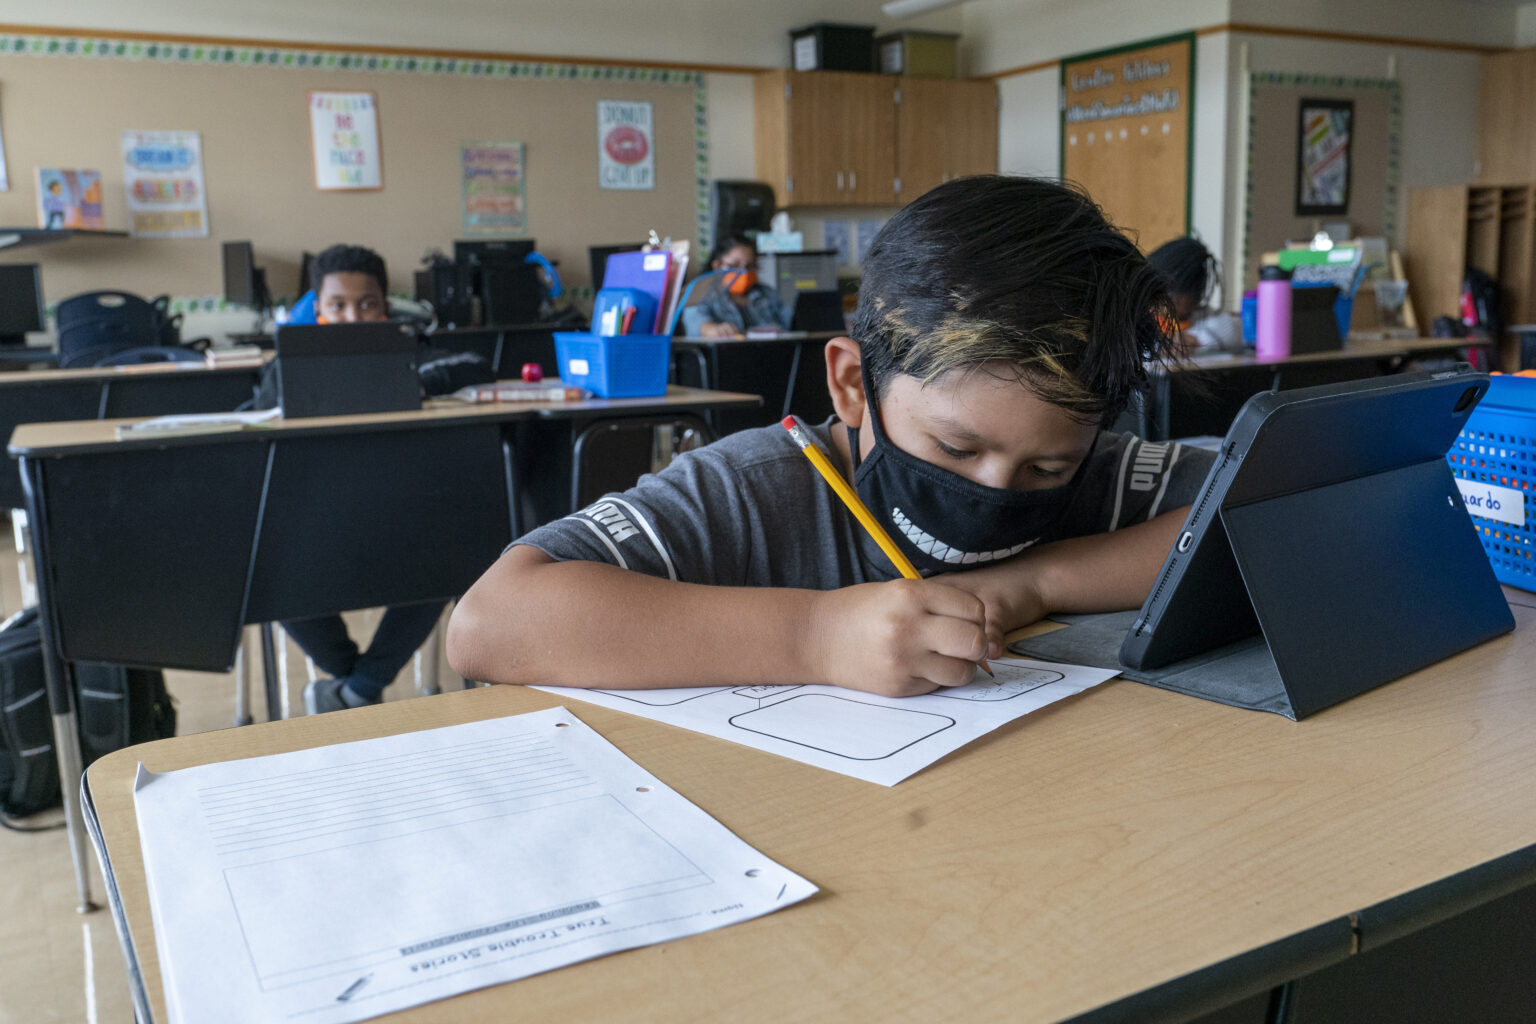 RICAS results show educational improvement, but more work needed